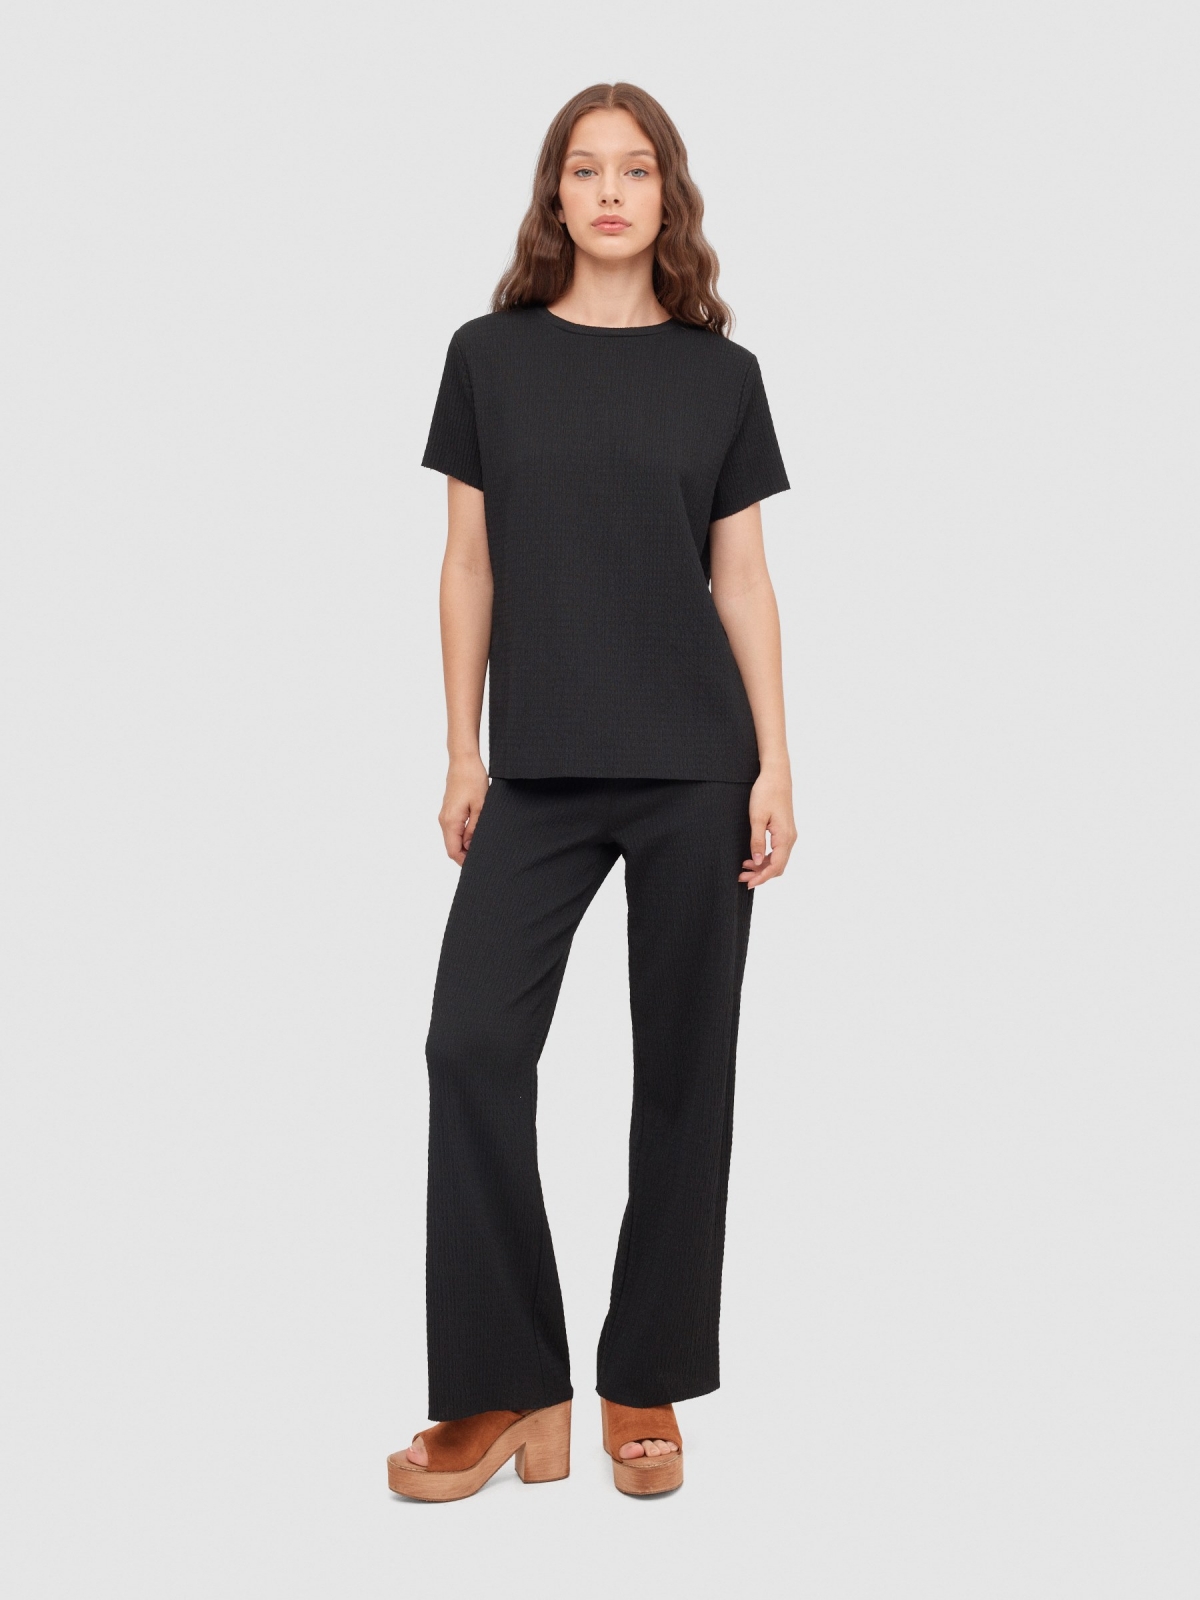 Textured fluid trousers black front view